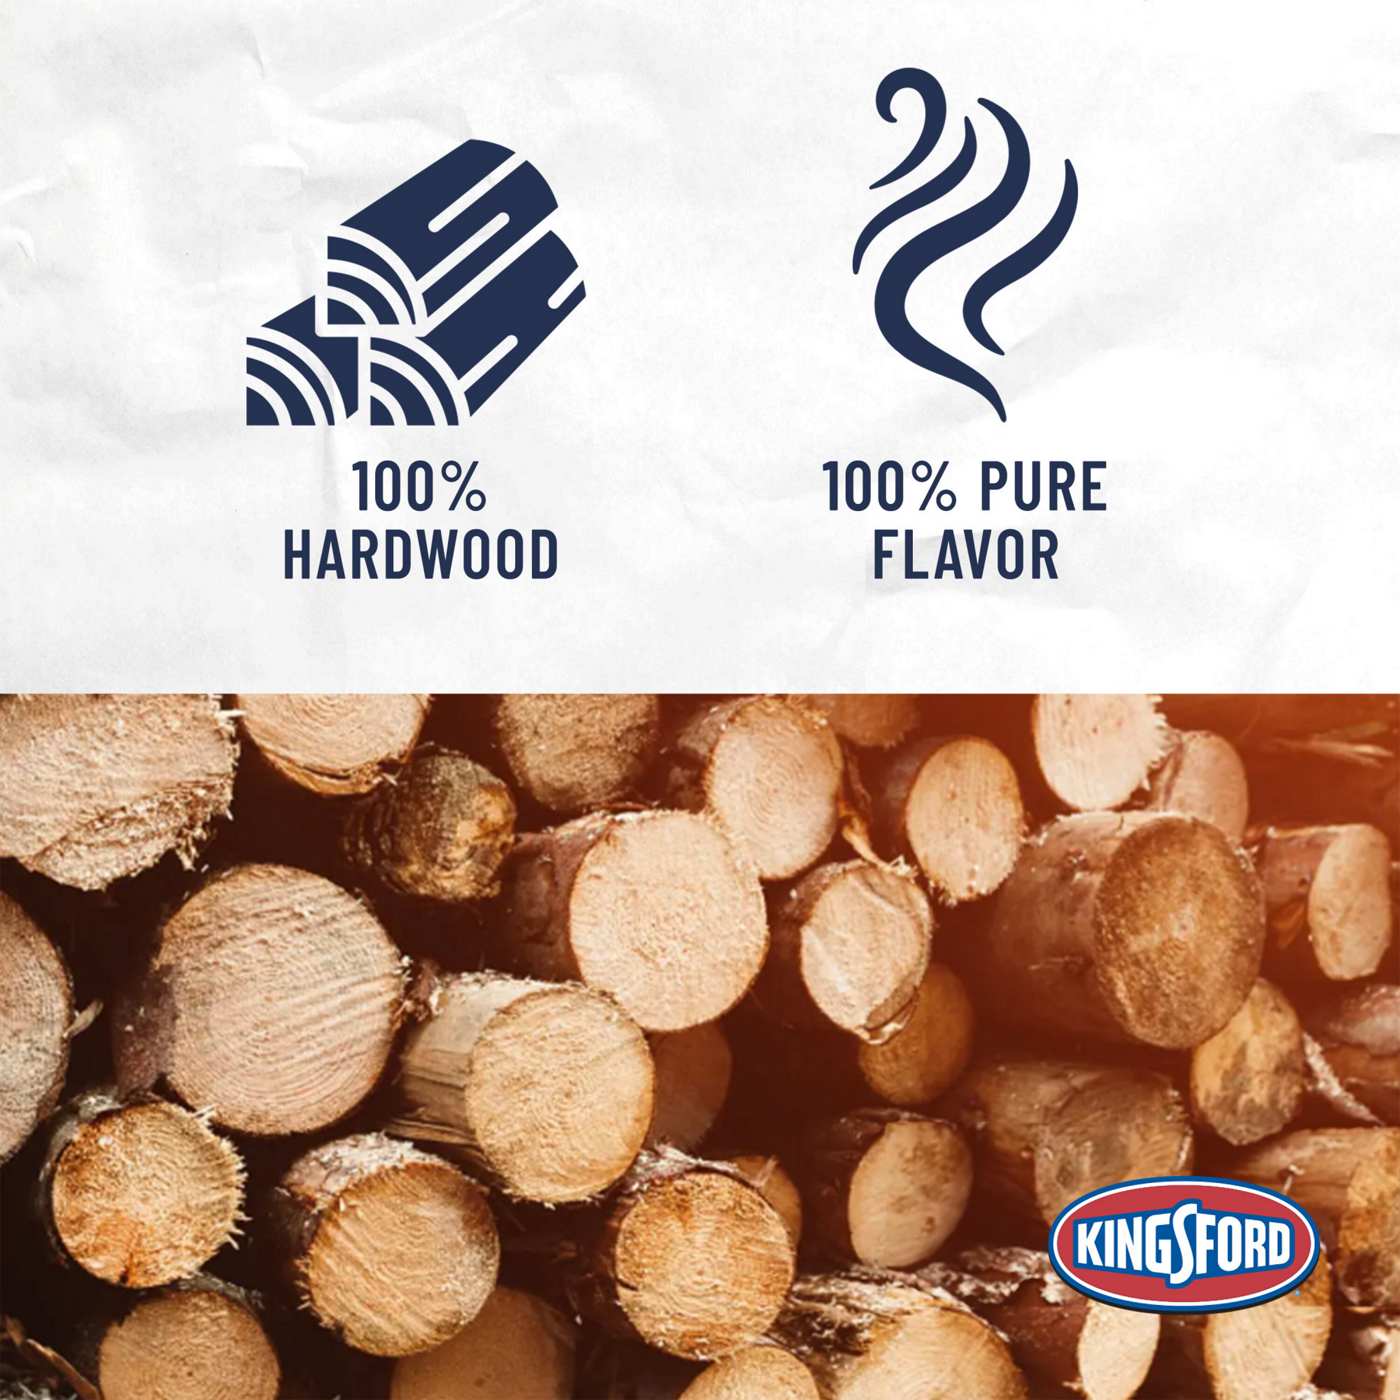 Kingsford Match Light Instant Charcoal Briquettes, BBQ Charcoal for Grilling; image 6 of 11